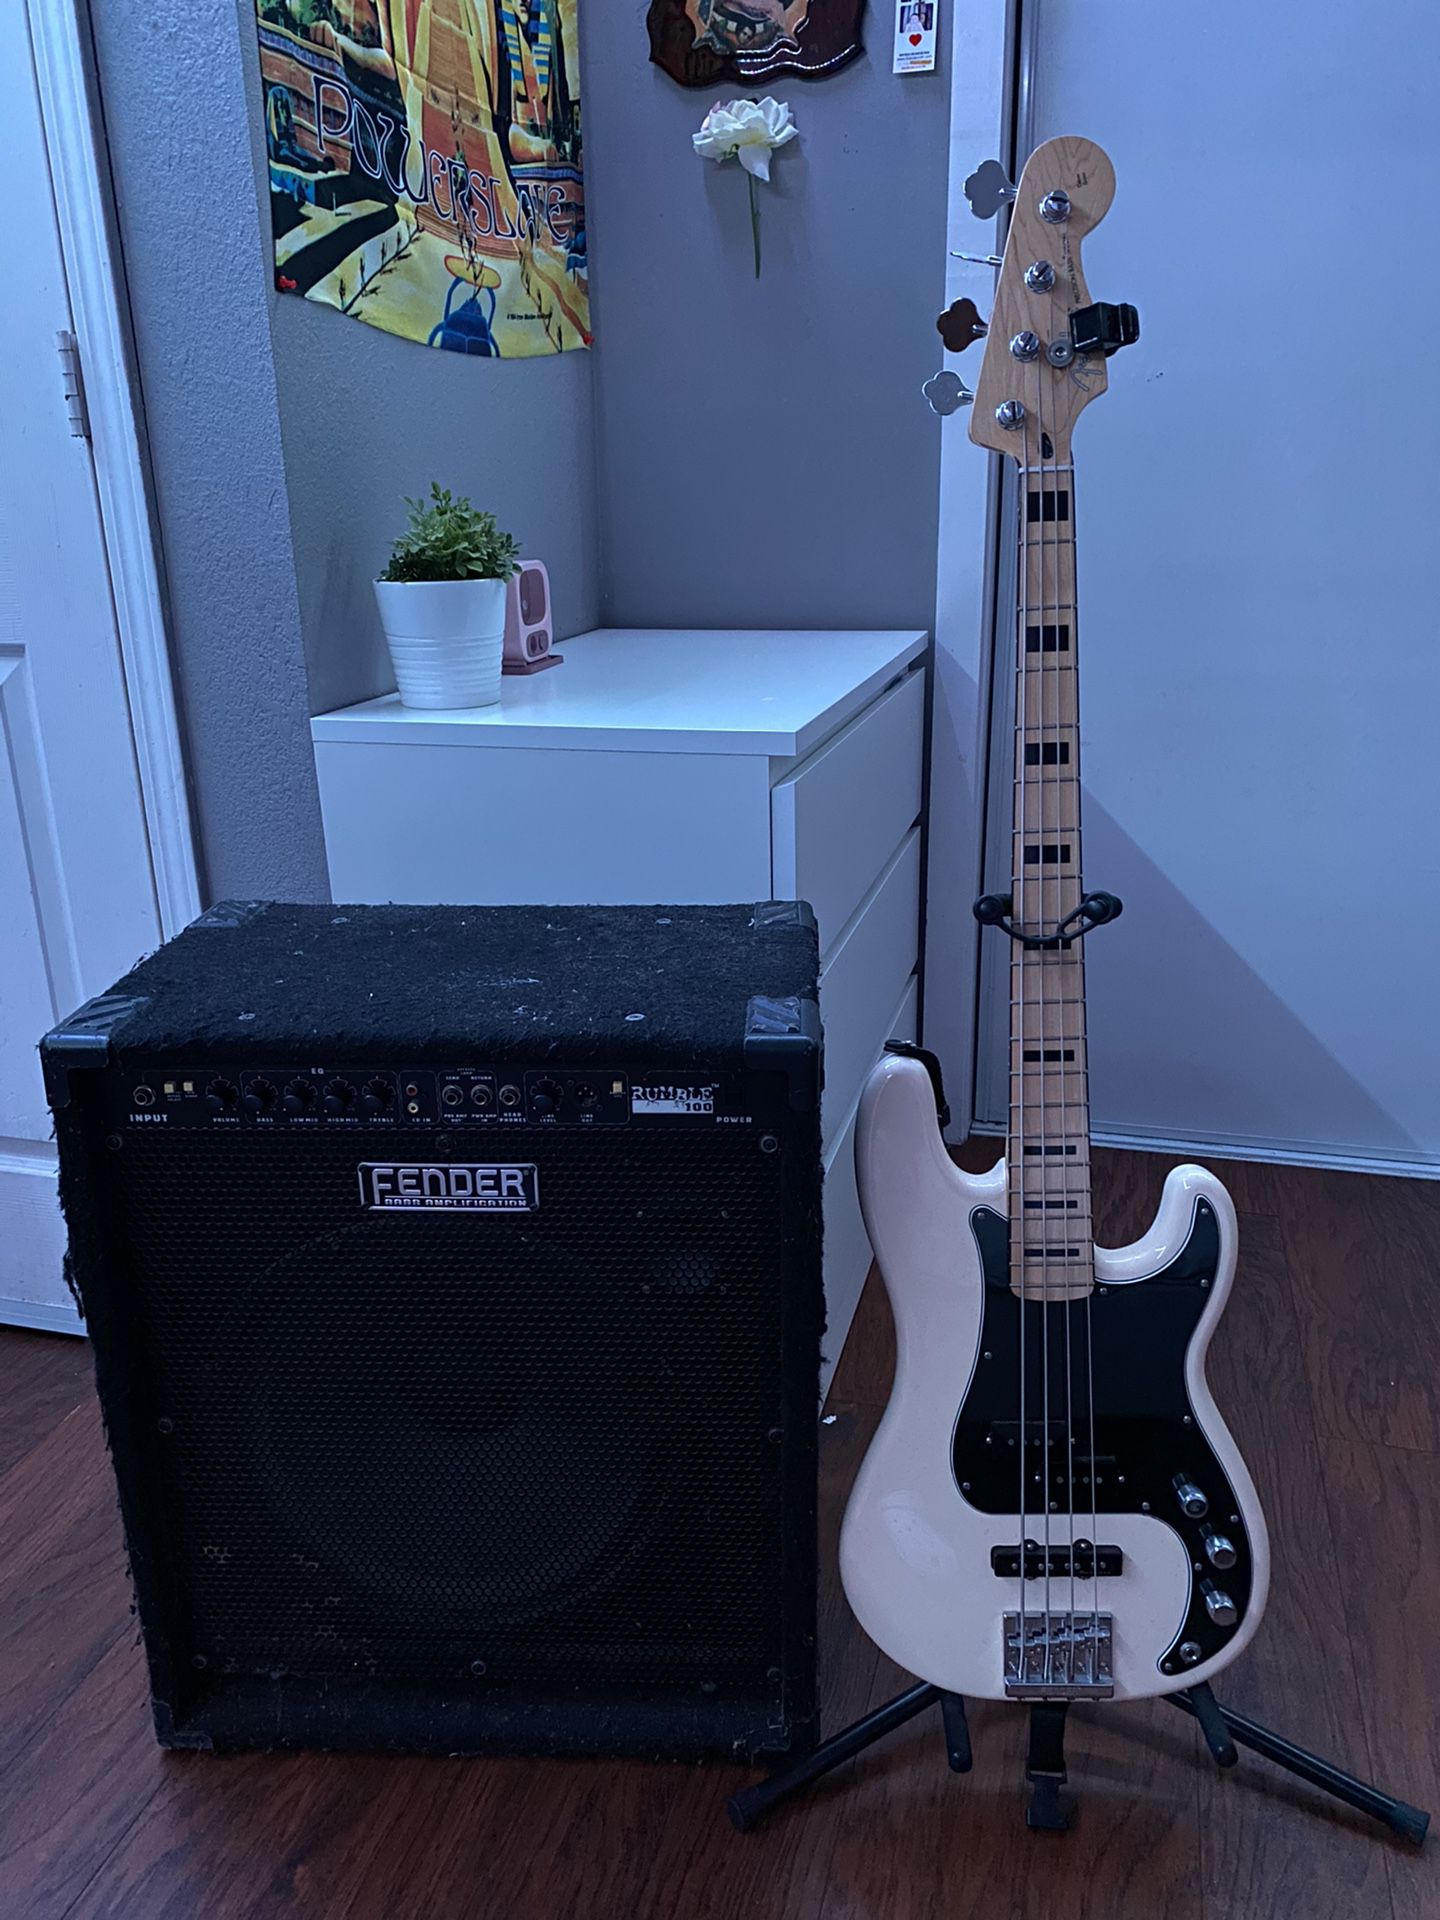 Fender Special Edition Deluxe PJ Bass Olympic White